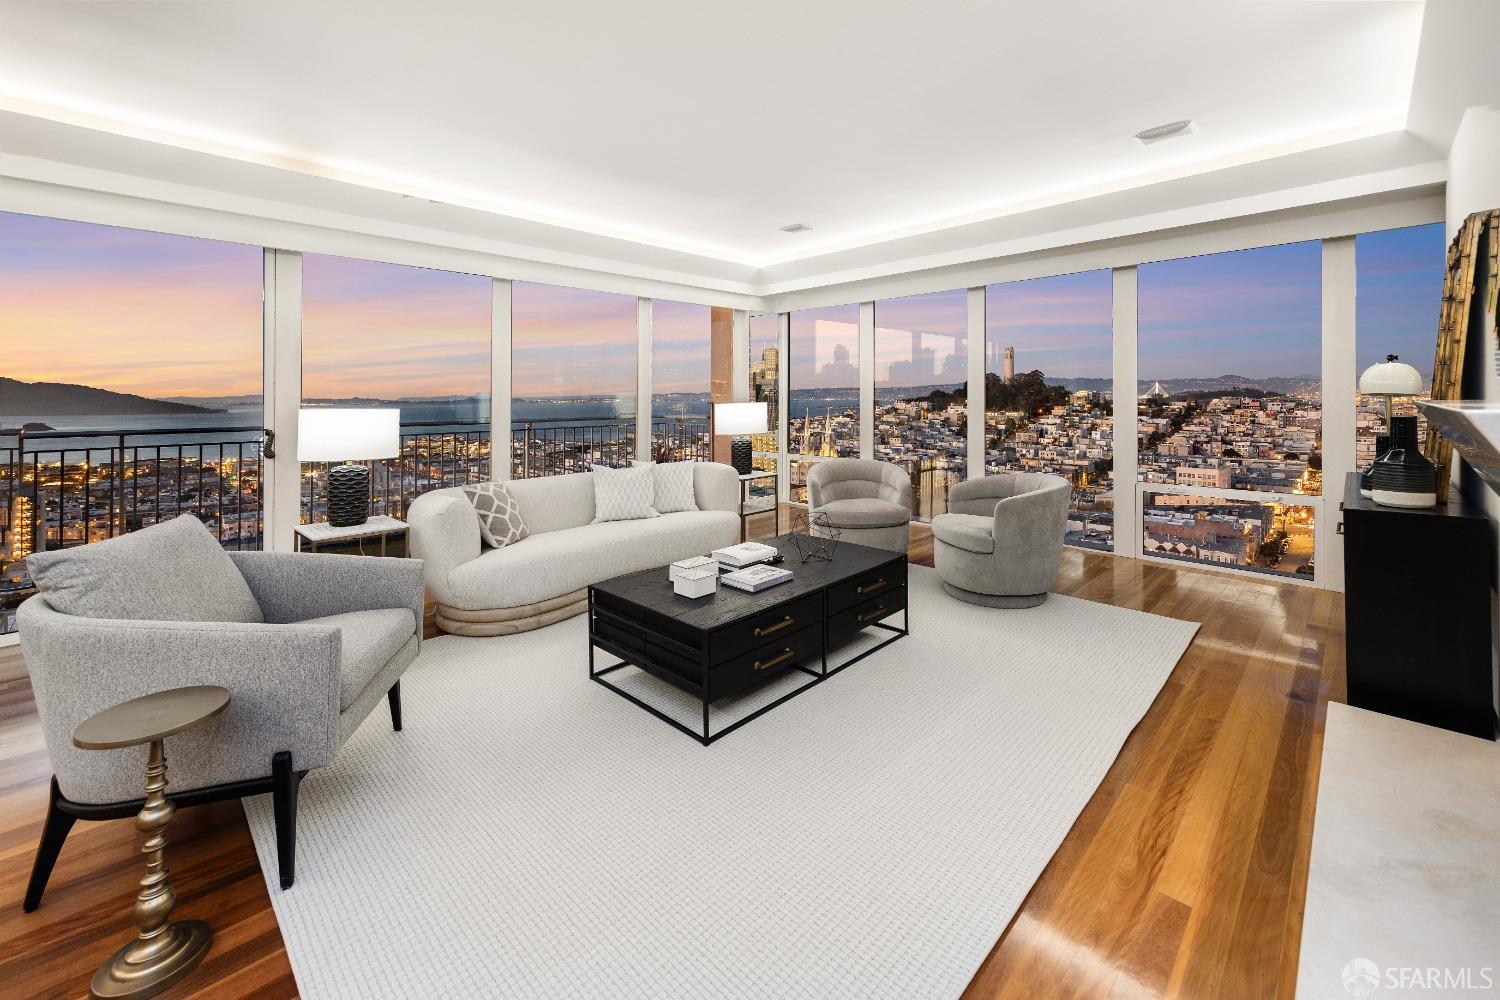 This rarely available apartment with 60-feet of northern windows at 1750 Taylor captivates with sweeping views of Alcatraz, Coit Tower, Bay Bridge, and the downtown San Francisco skyline.  Encounter a custom layout featuring a living room, library and wet bar, dining area, and a two-sided fireplace - creating versatility for many styles of use.  The oversized primary bedroom is outfitted with ample closets and a two-chambered bathroom. The guest bedroom includes a bathroom and shower with a Bay view. Infrastructure enhancements include power shades and sophisticated overhead and cove lighting. And those views! Built in 1964 and known as The Royal Towers, 1750 Taylor is Northside San Francisco's most highly amenitized address.  Residents enjoy a custom fitness center and a glass-housed, heated swimming pool with a retractable roof.  Its majestic owner's club room with soaring ceilings and landmark views, library, conference room & lobby were all recently redesigned by internationally renowned design firm ODADA.  A 24/7 attended lobby, large and attentive staff, and professional on-site management ensure one's time in San Francisco is effortless and enjoyable.